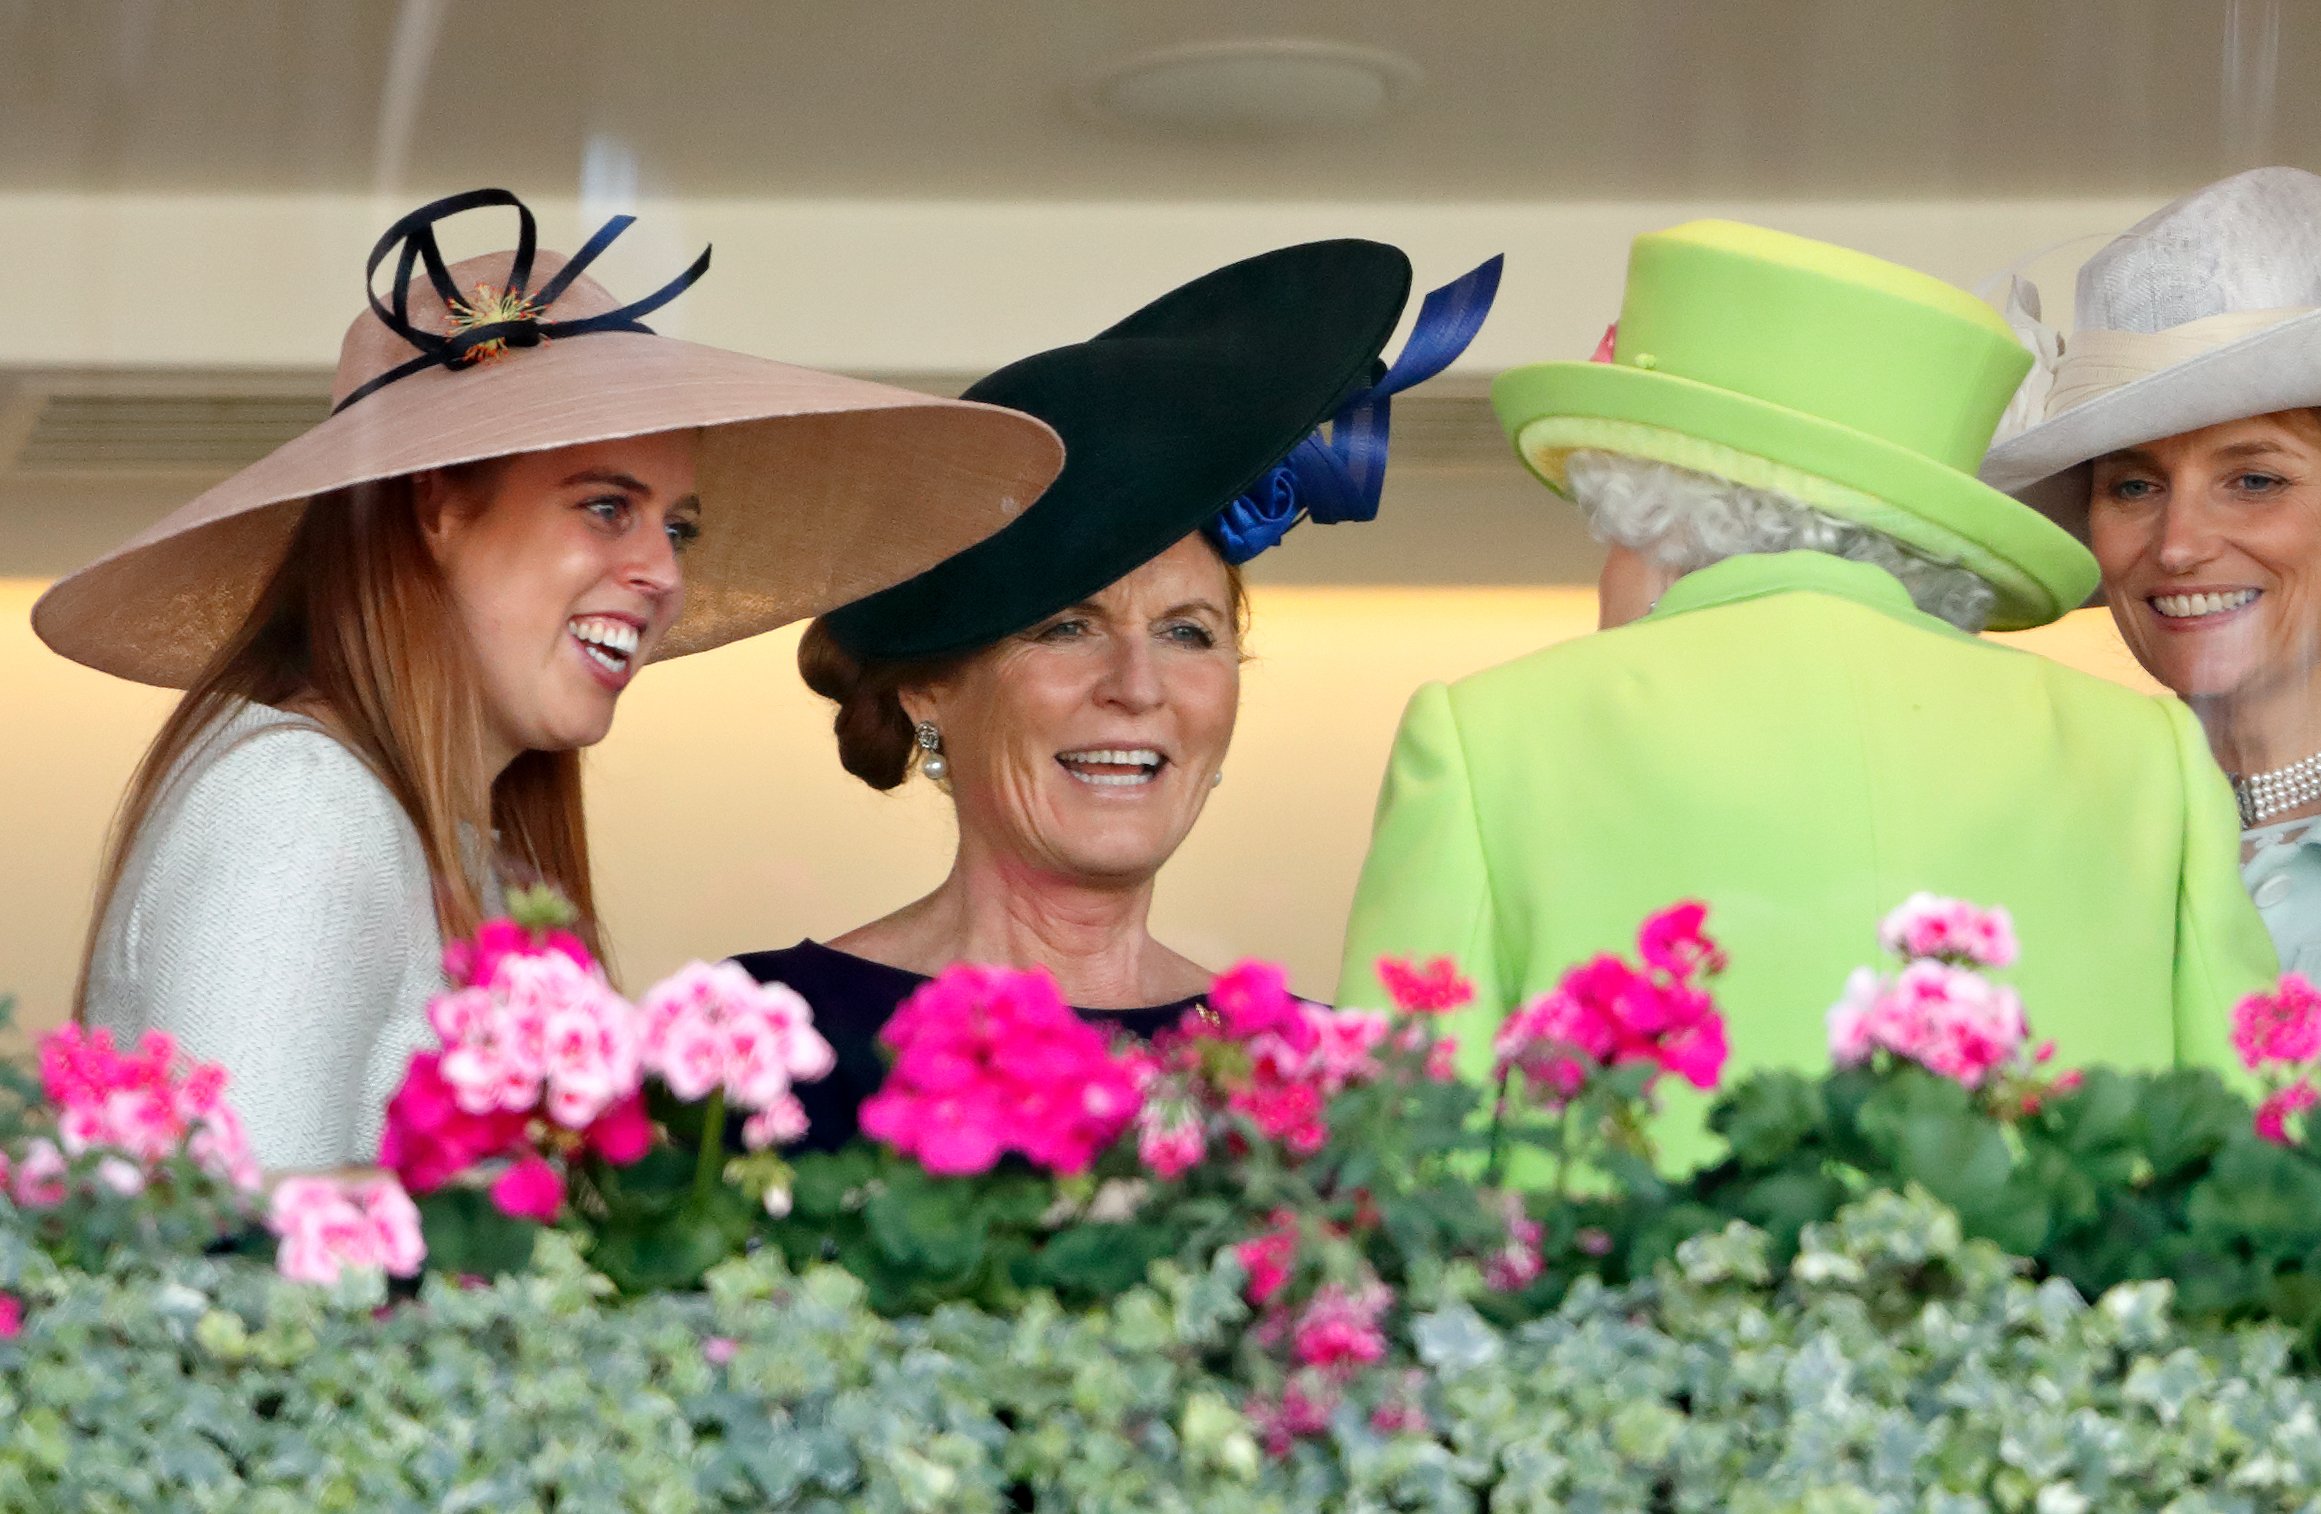 Princess Beatrice and Sarah, Duchess of York pictured with Queen Elizabeth II in the Royal Box during day 4 of Royal Ascot at Ascot Racecourse on June 22, 2018 in Ascot, England | Source: Getty Images